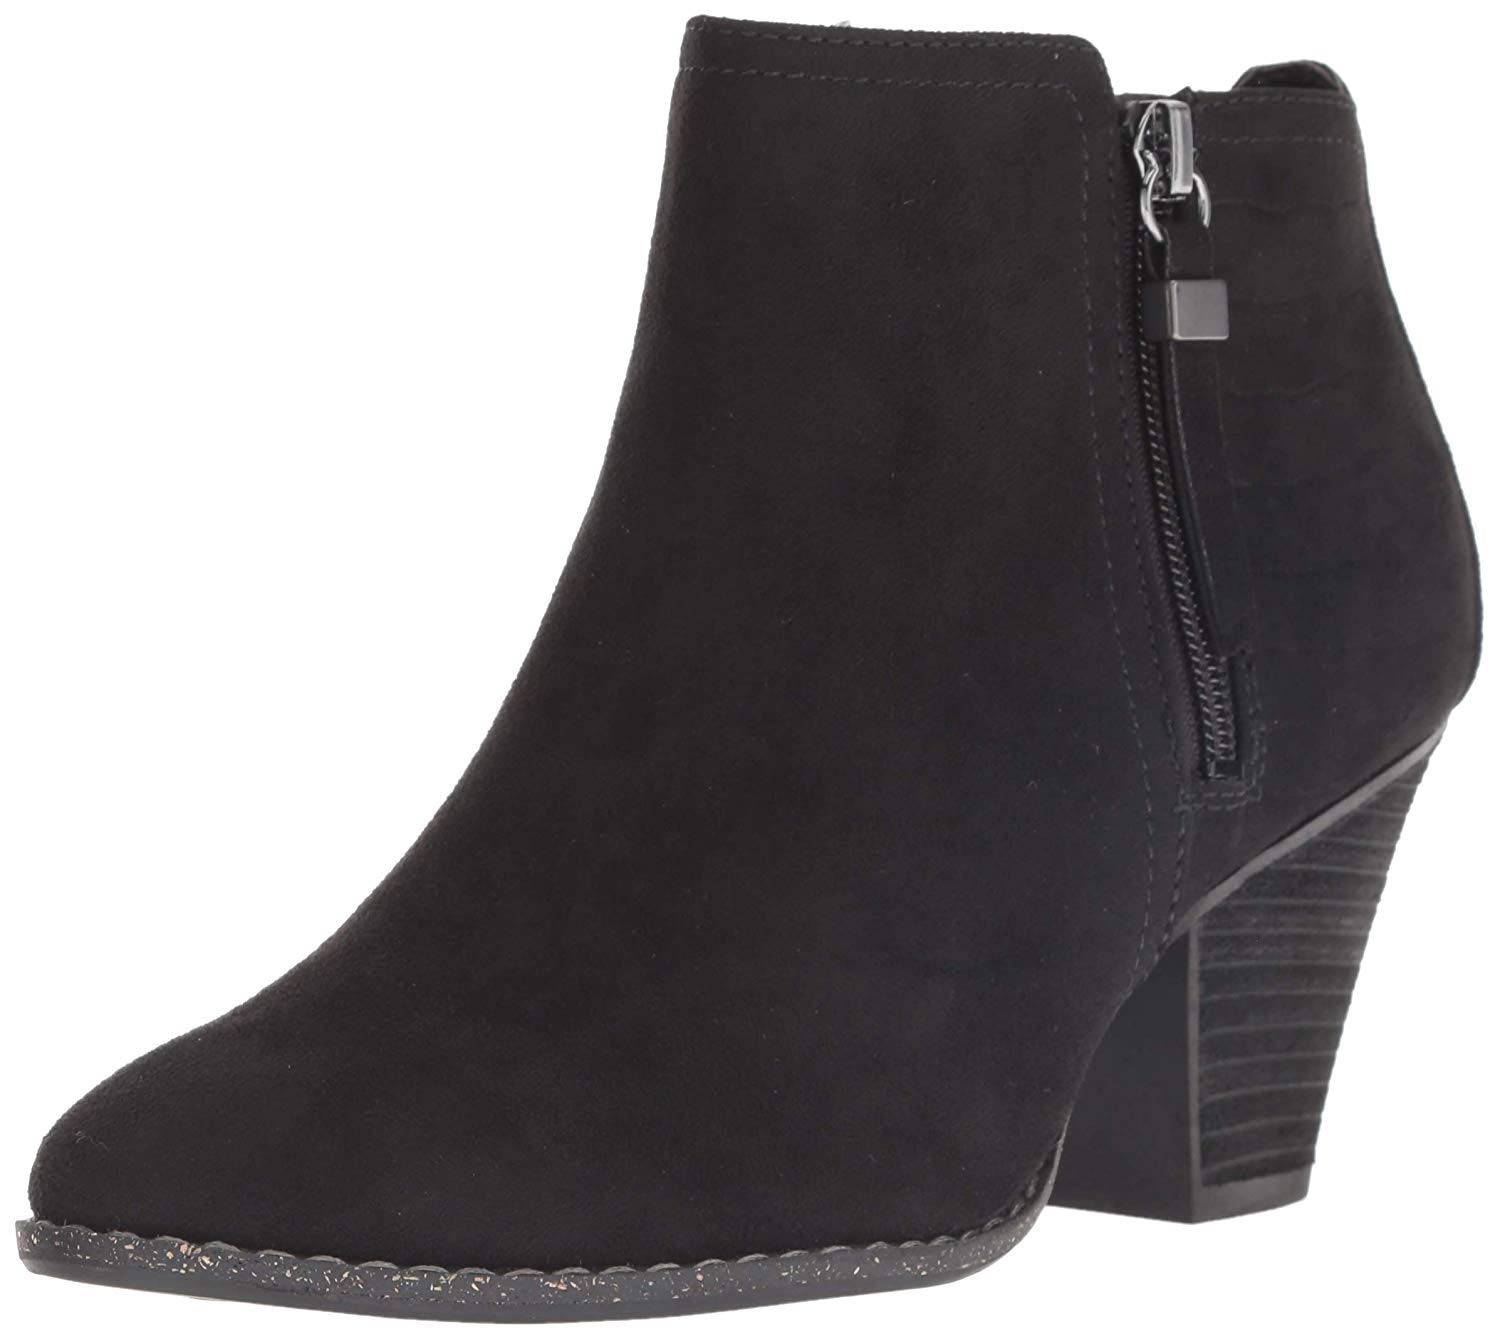 Dr. Scholl's Women's Cunning Ankle Boot Black Microfiber - My Leather Swear